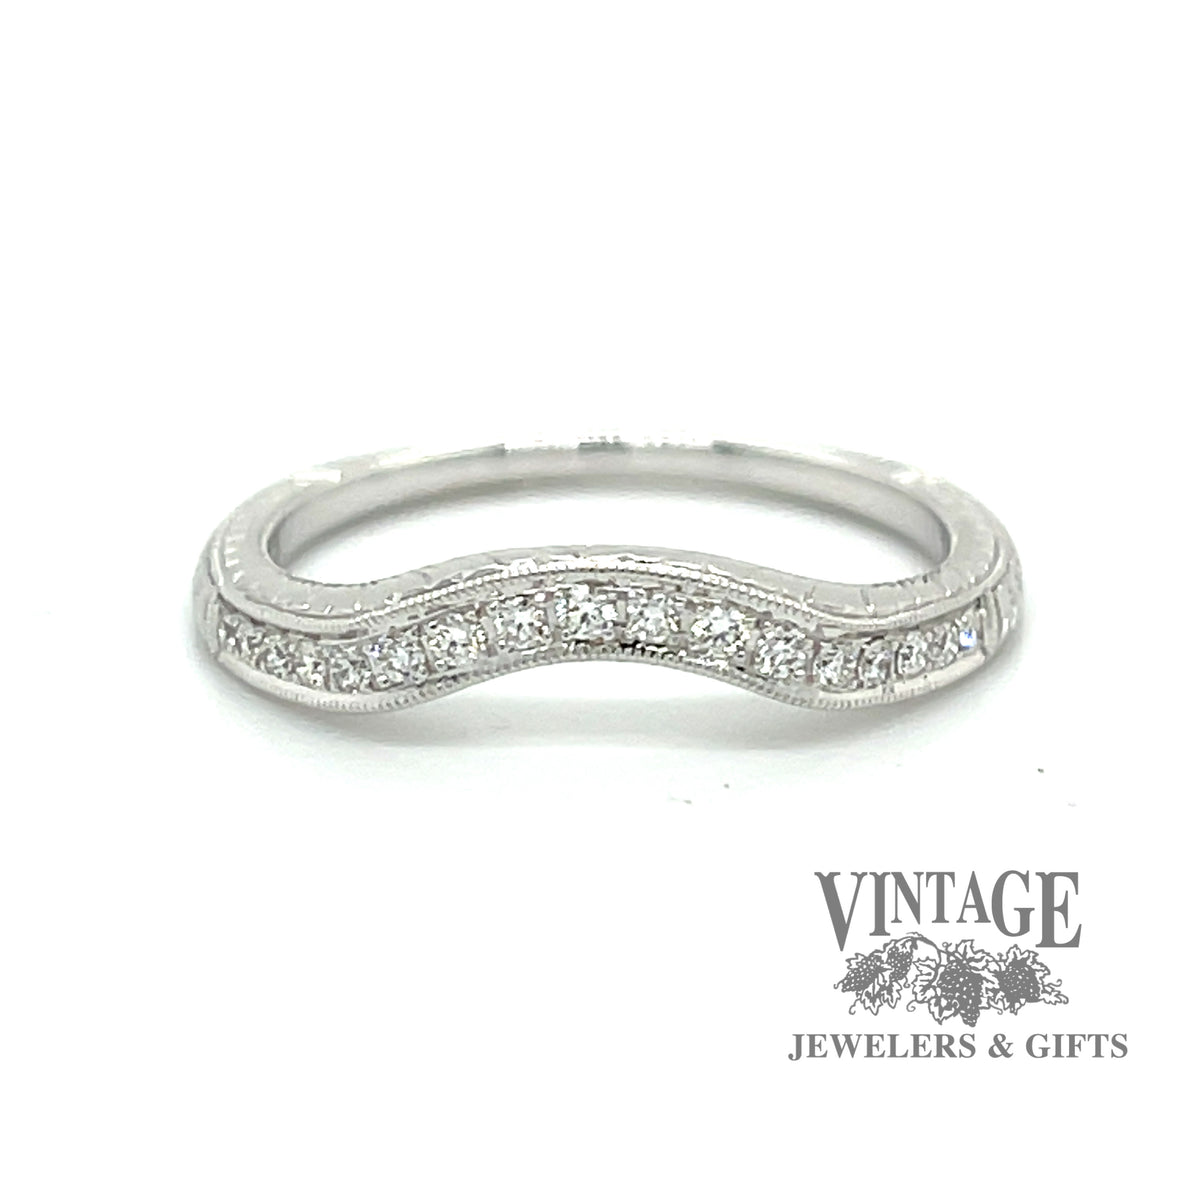 Curved diamond 14kw gold ring band